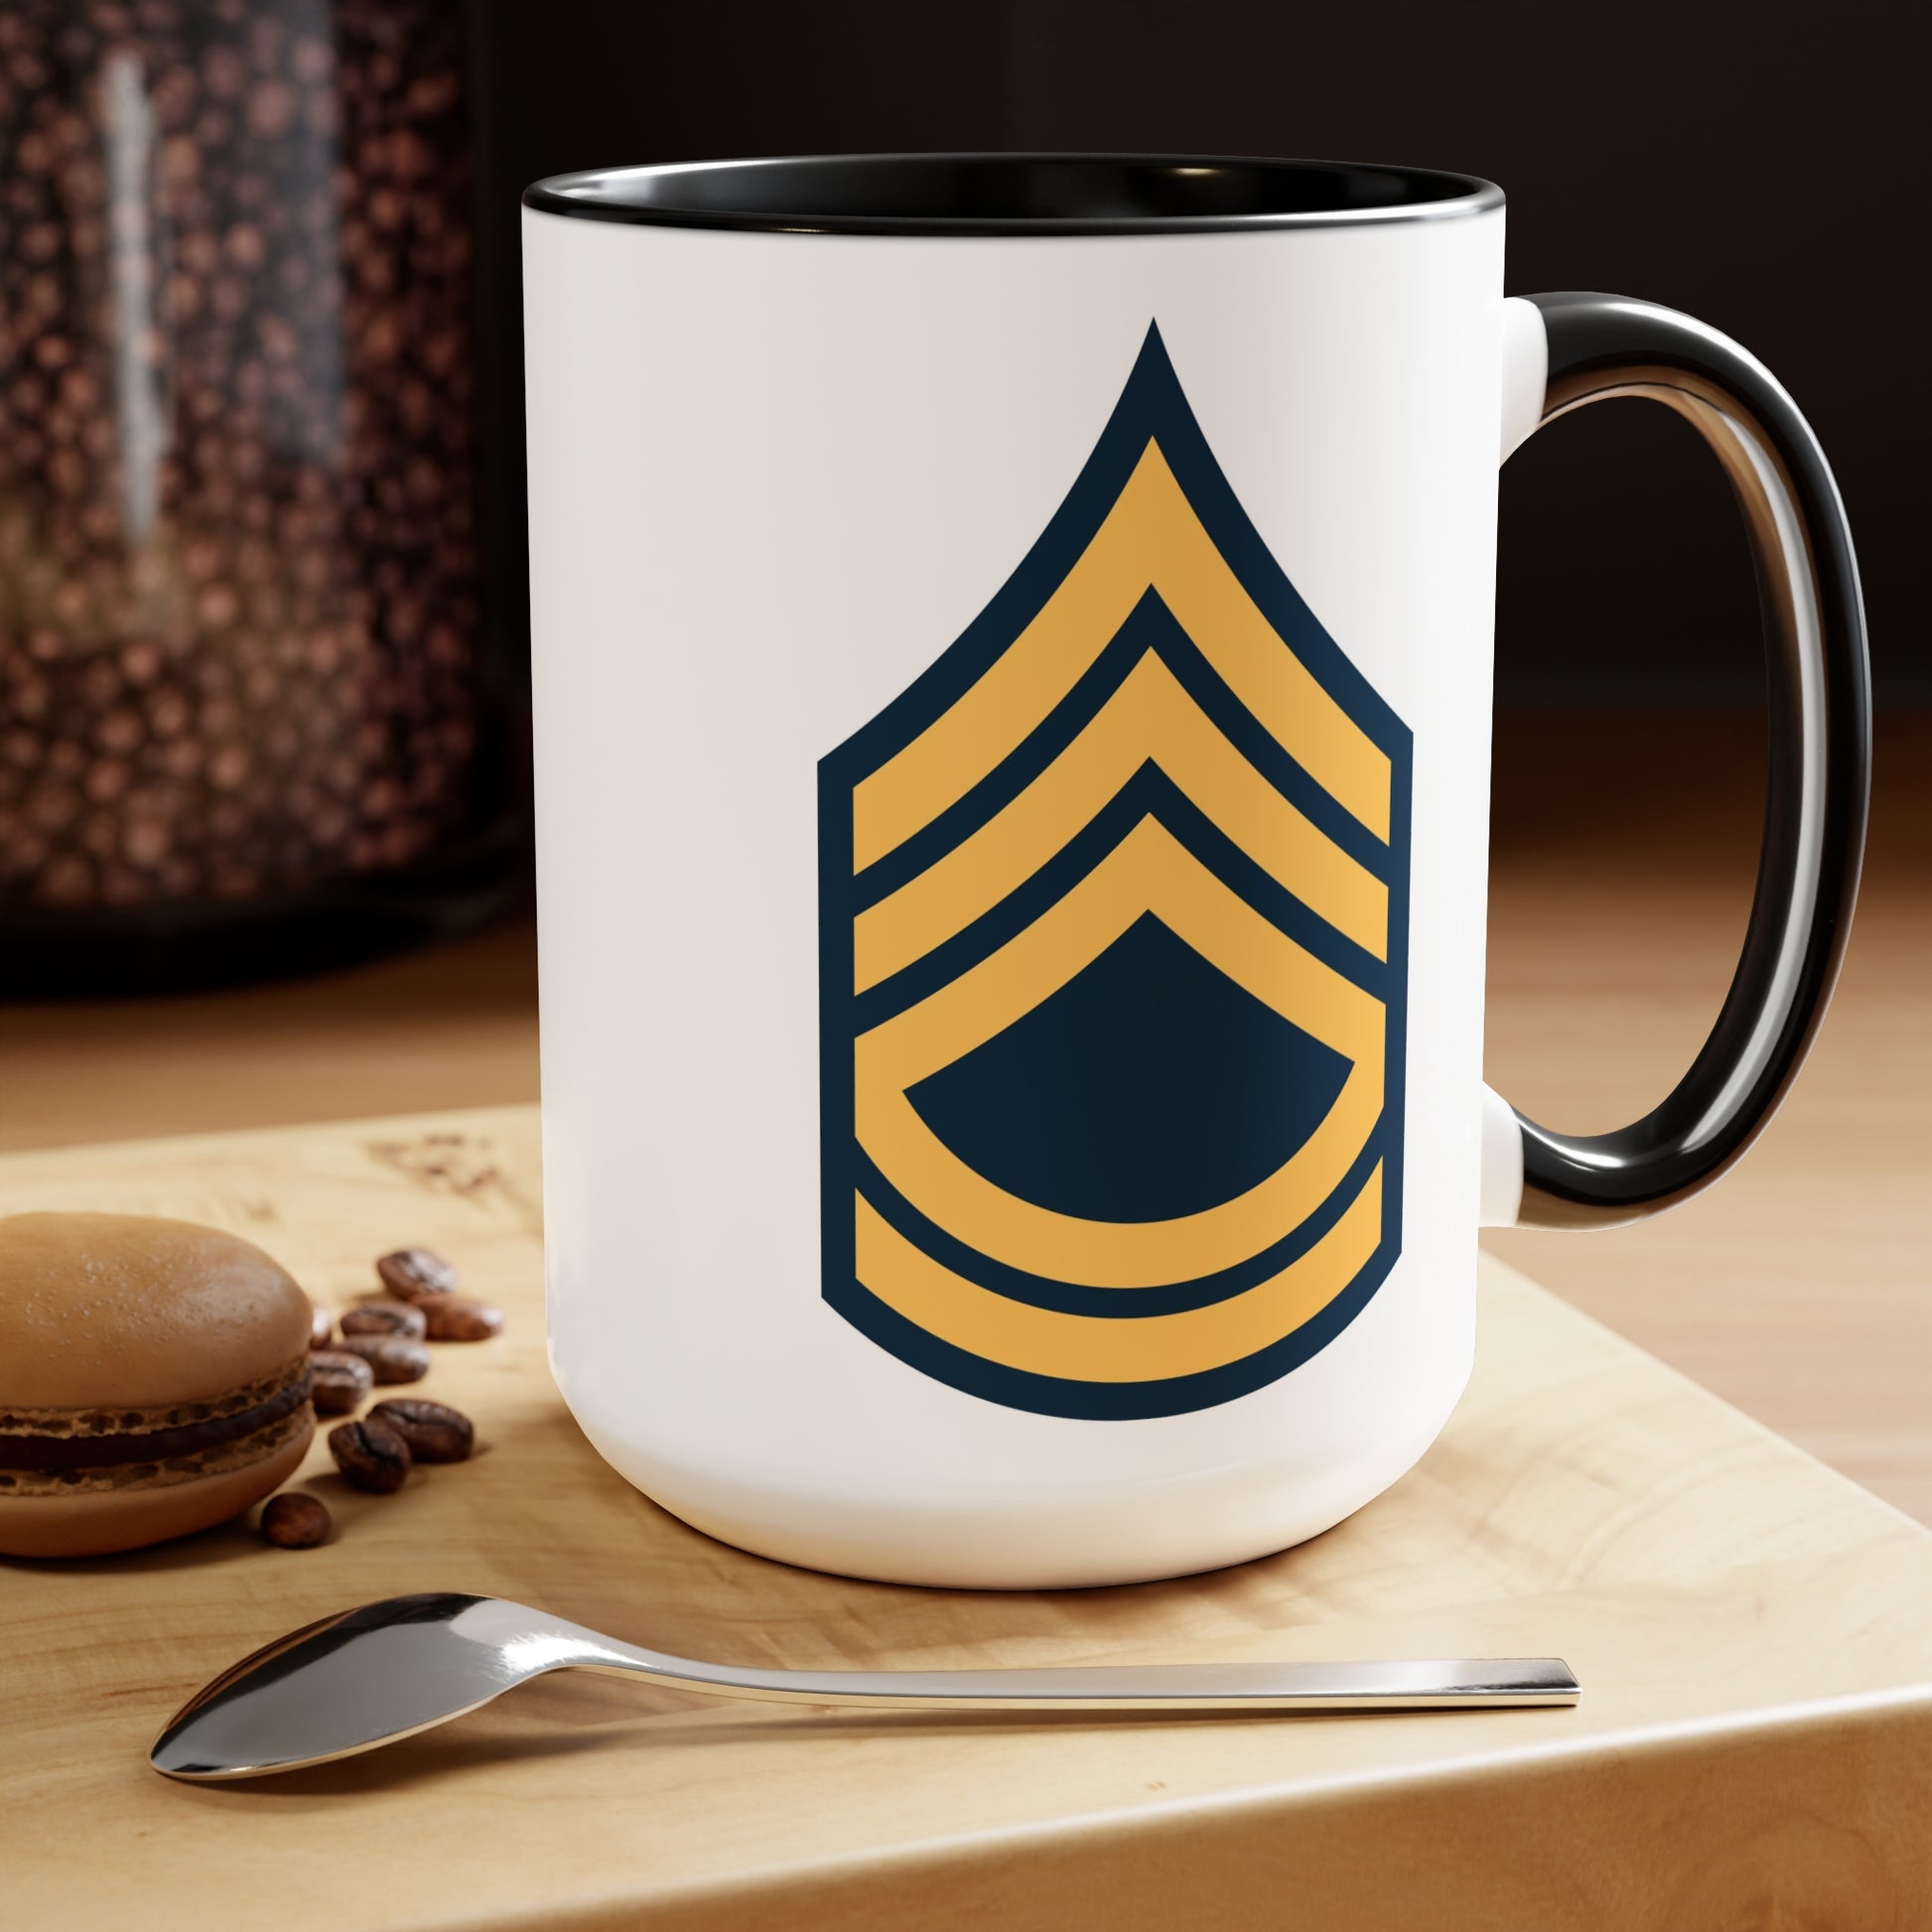 US Army Sergeant First Class Coffee Mug - Double Sided Two-Tone Black Accent 15oz White Ceramic by TheGlassyLass